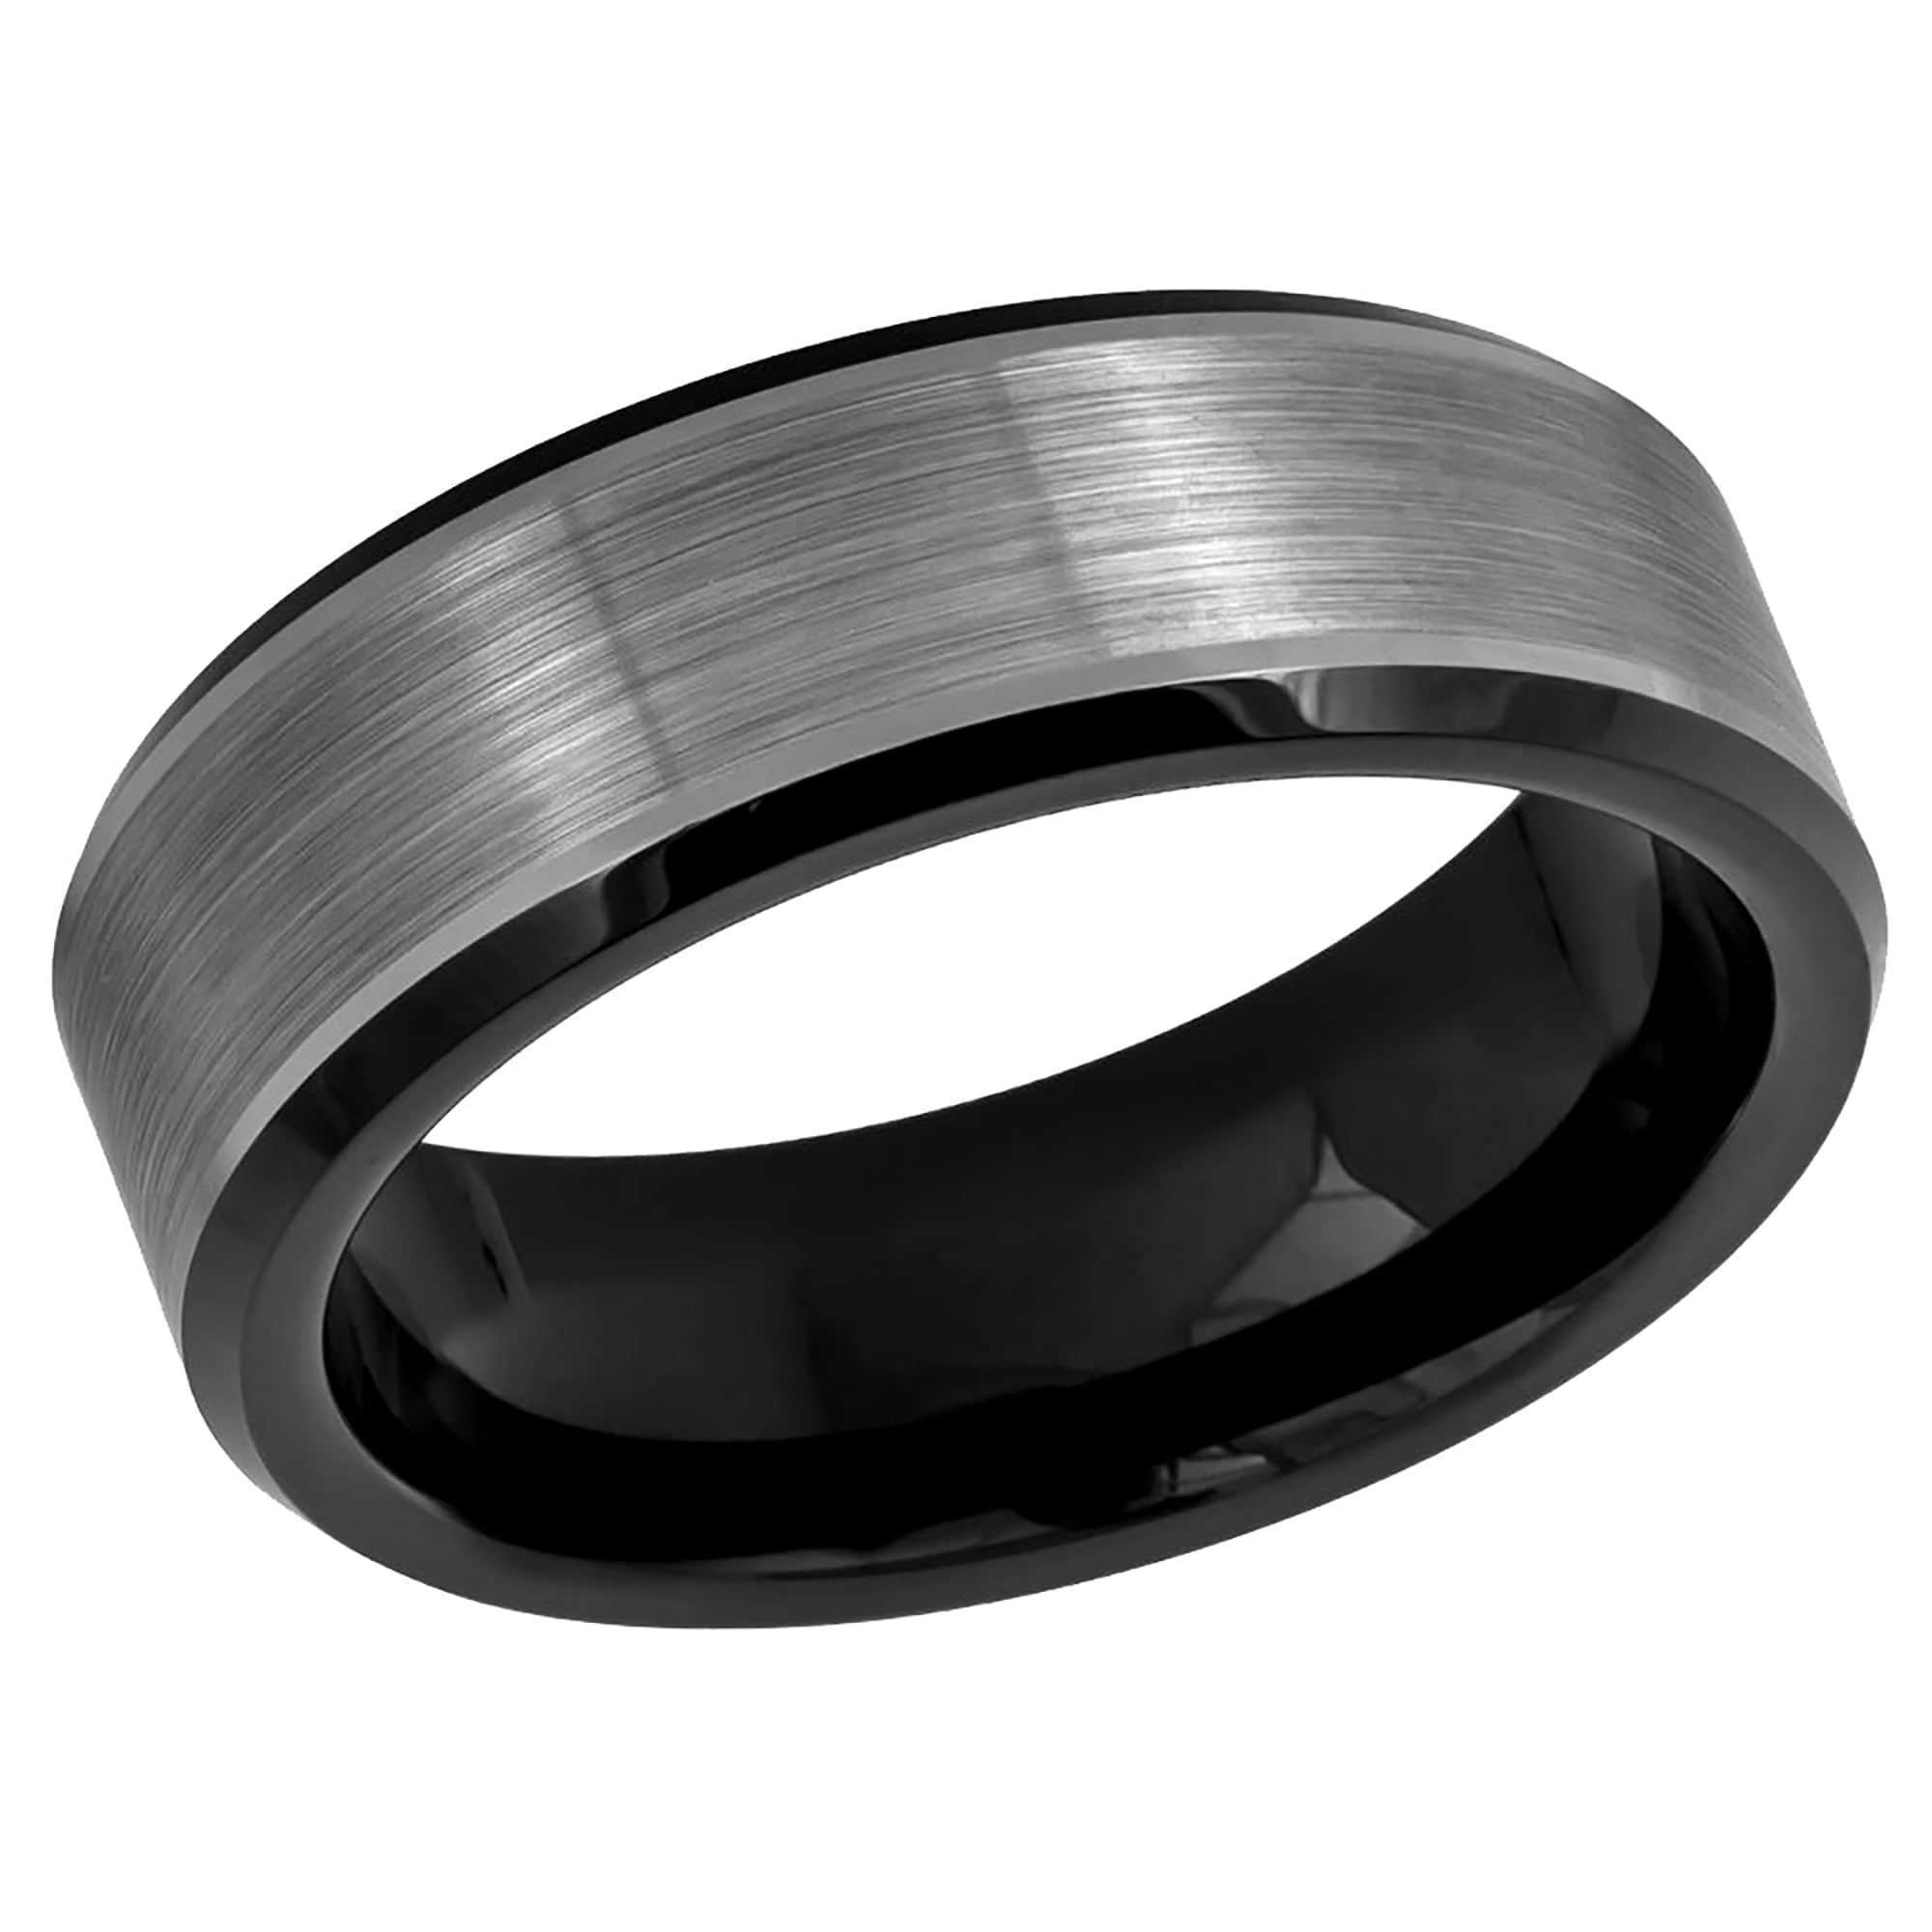 Details about   Tungsten Carbide Wedding Band Wood  CZ  7-13-Free Gift Box 